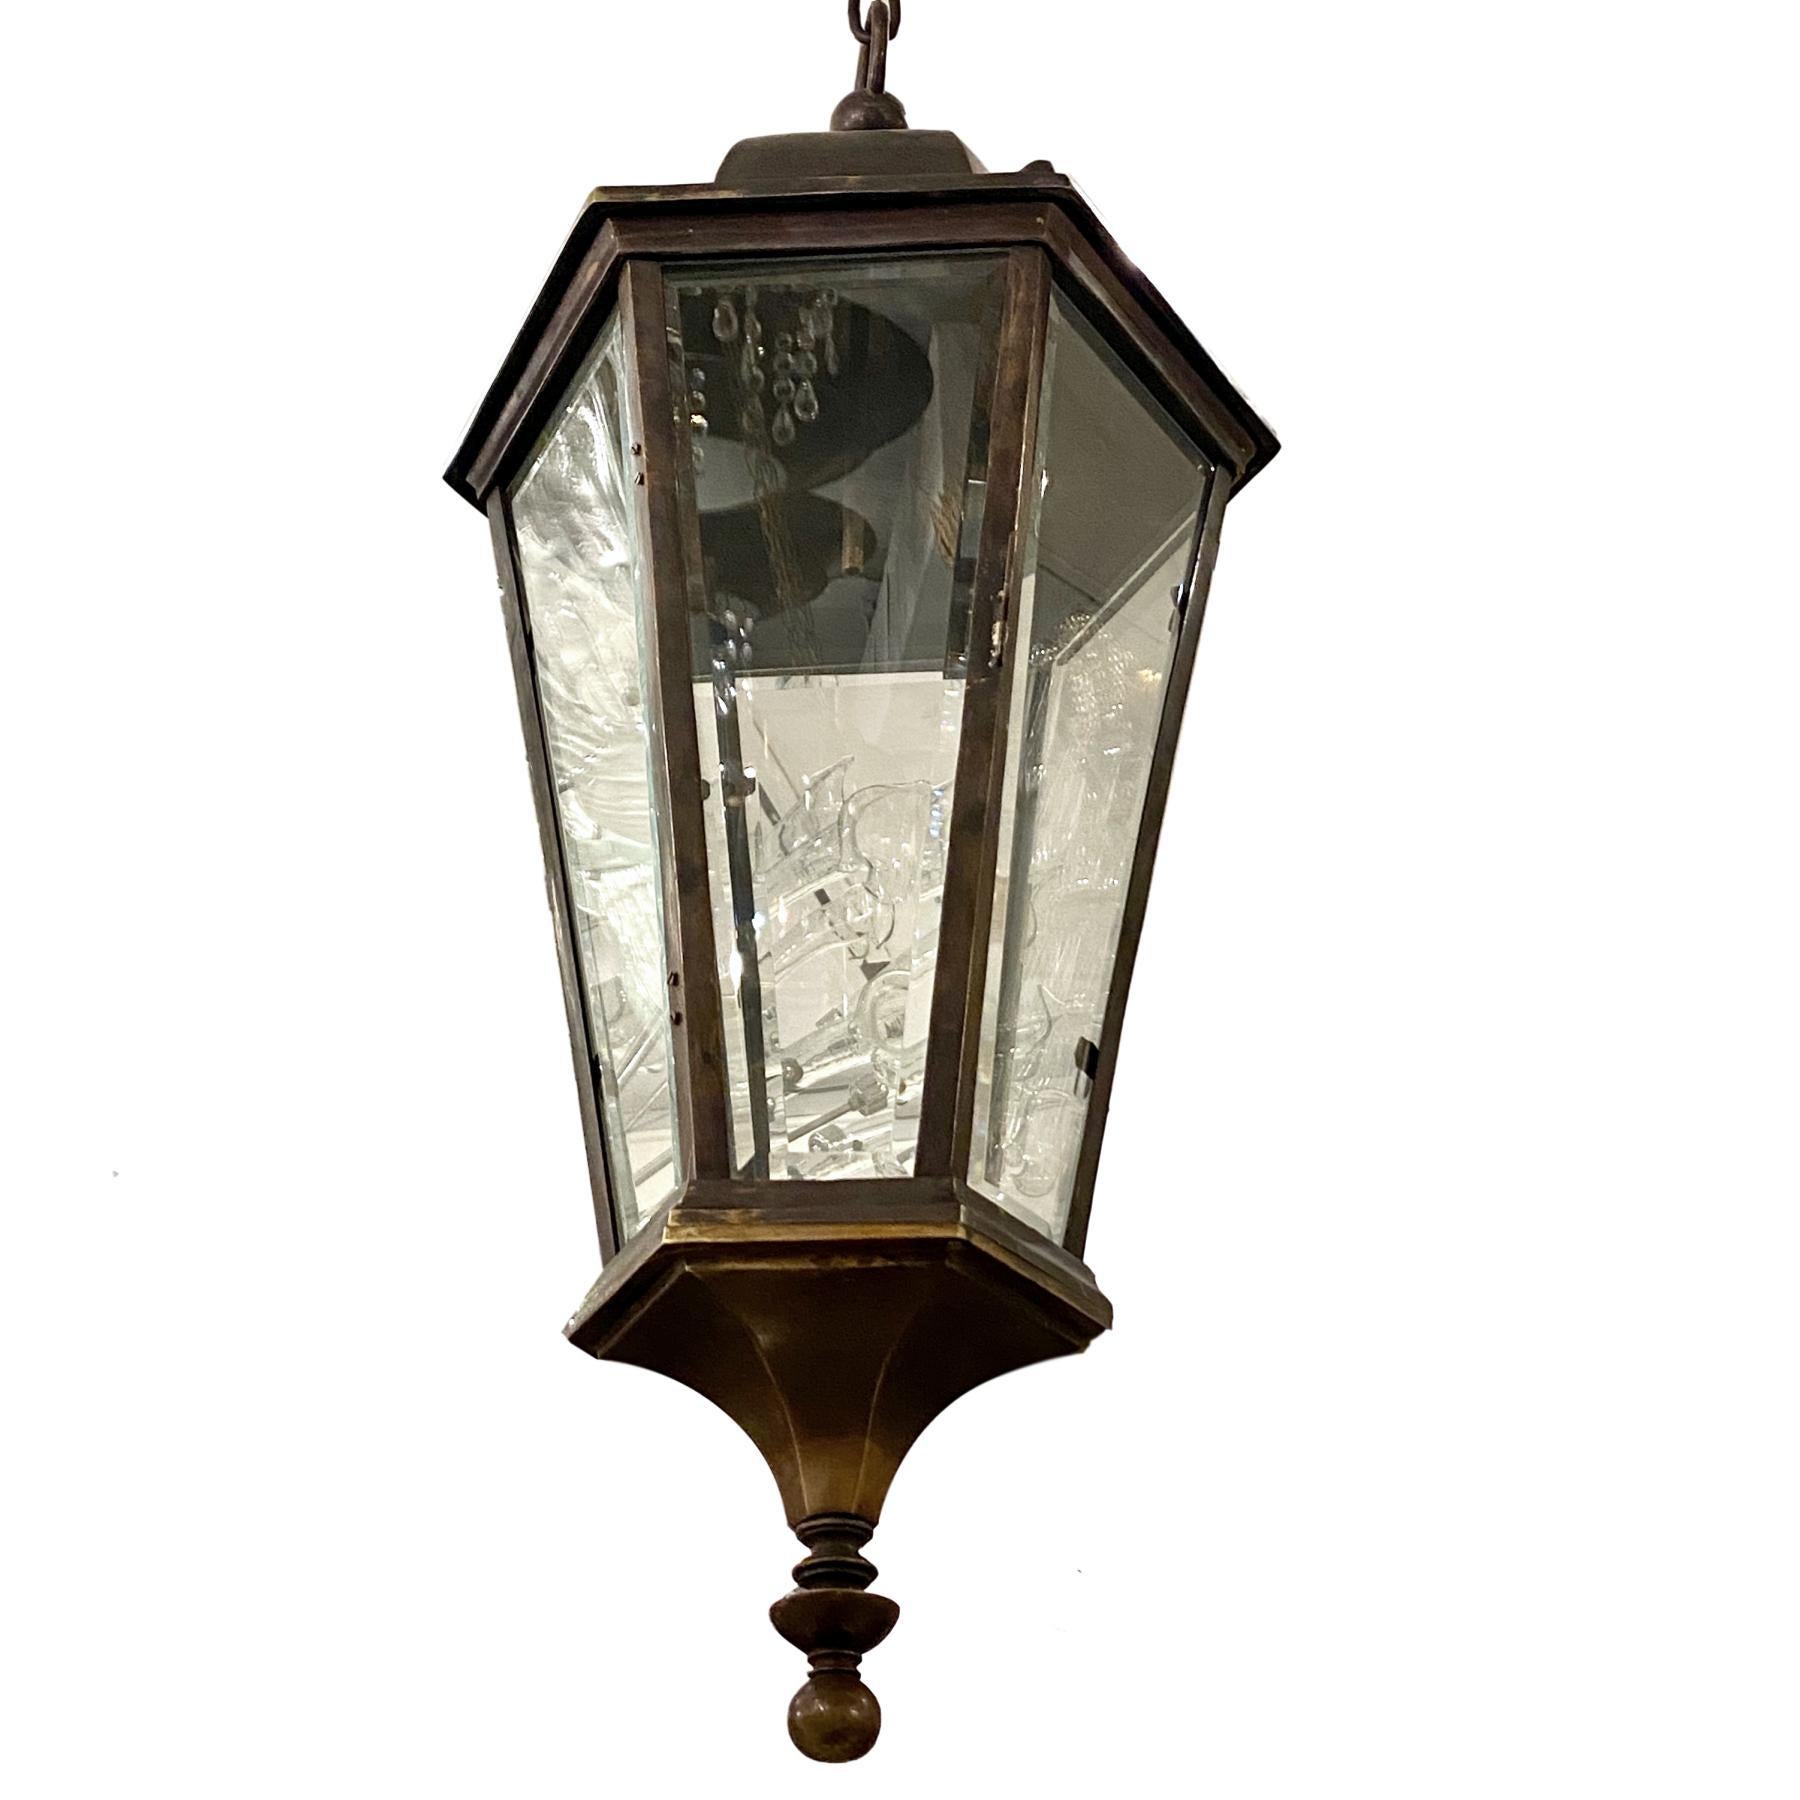 A set of eight circa 1940s English bronze outdoor pendant lantern with interior cluster of candelabra lights. Sold individually.

Measurements:
Height 36